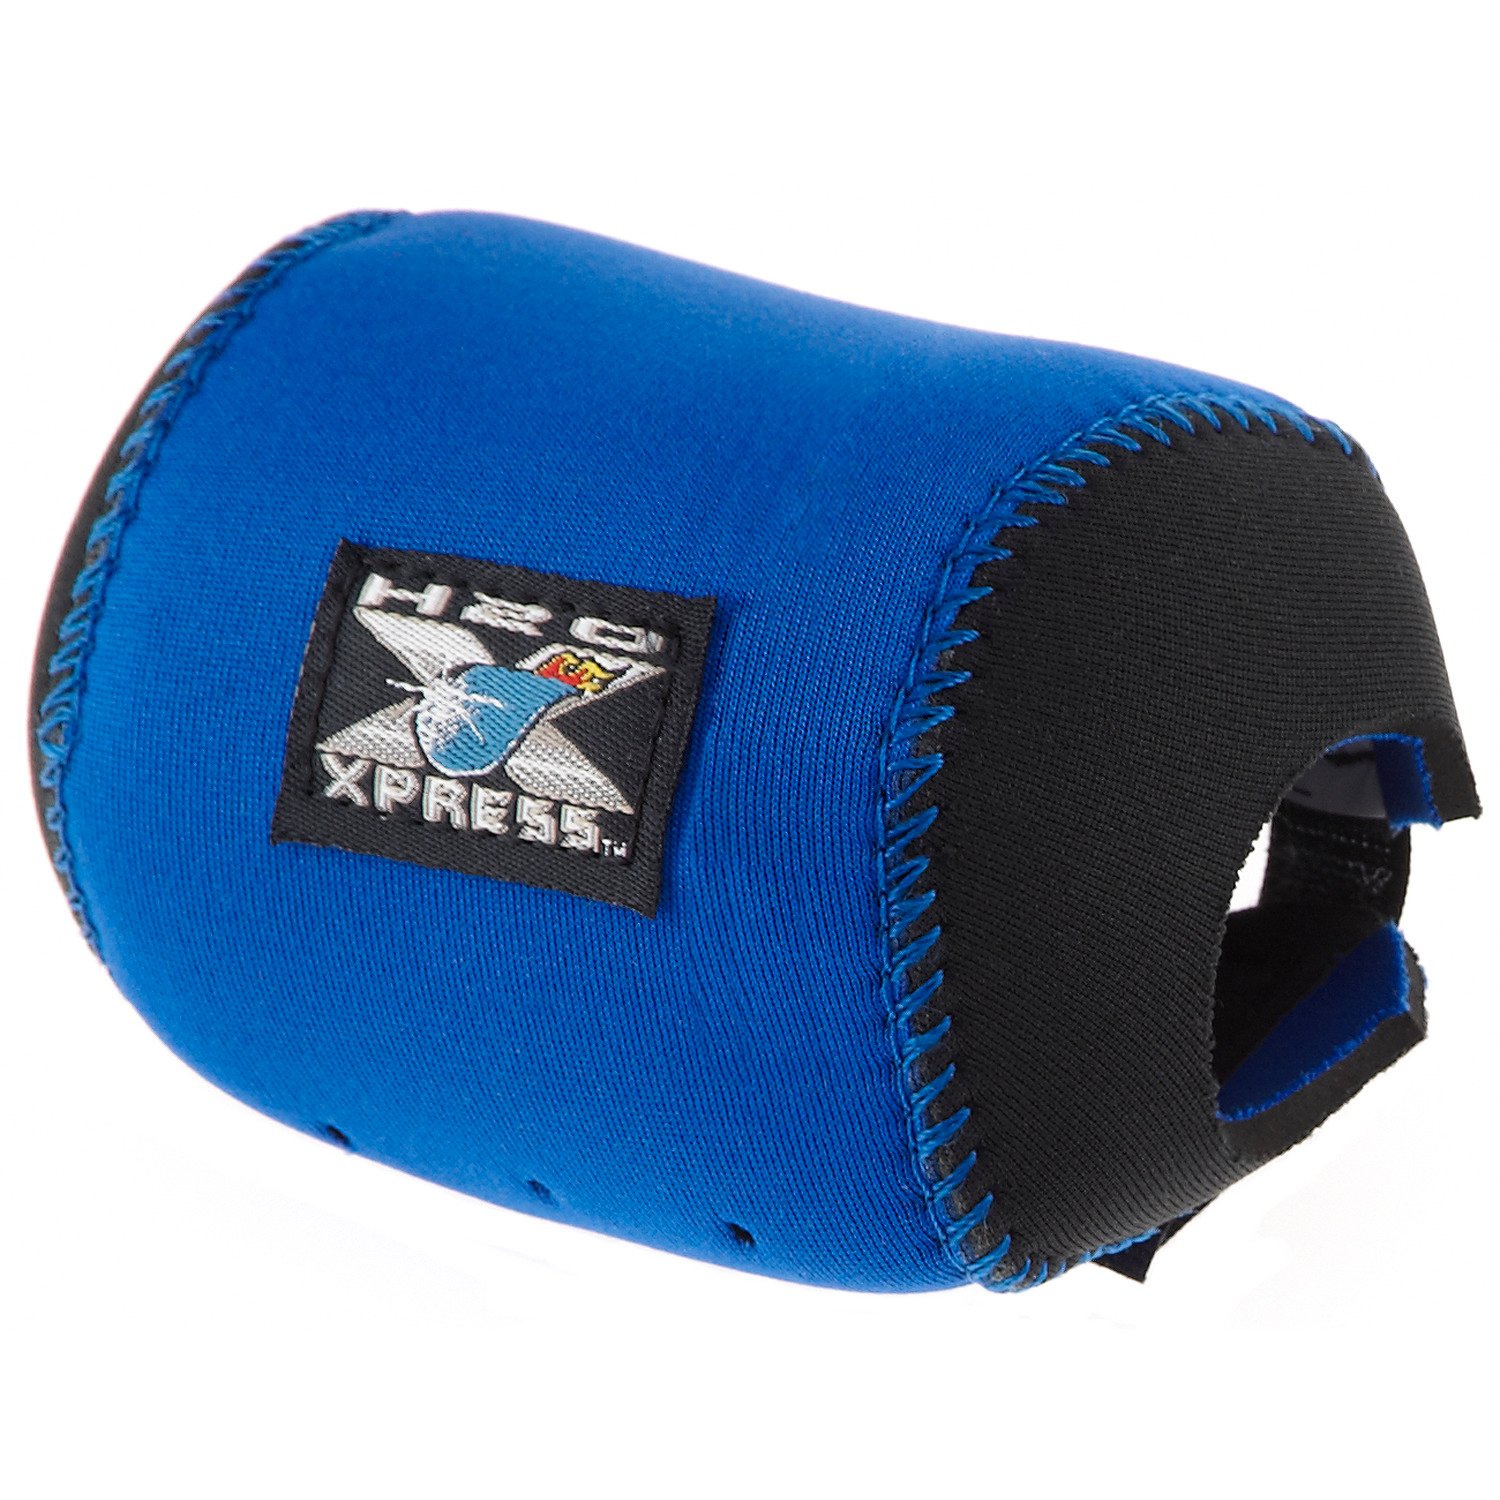 Academy Sports + Outdoors H2O XPRESS™ Baitcast Reel Cover